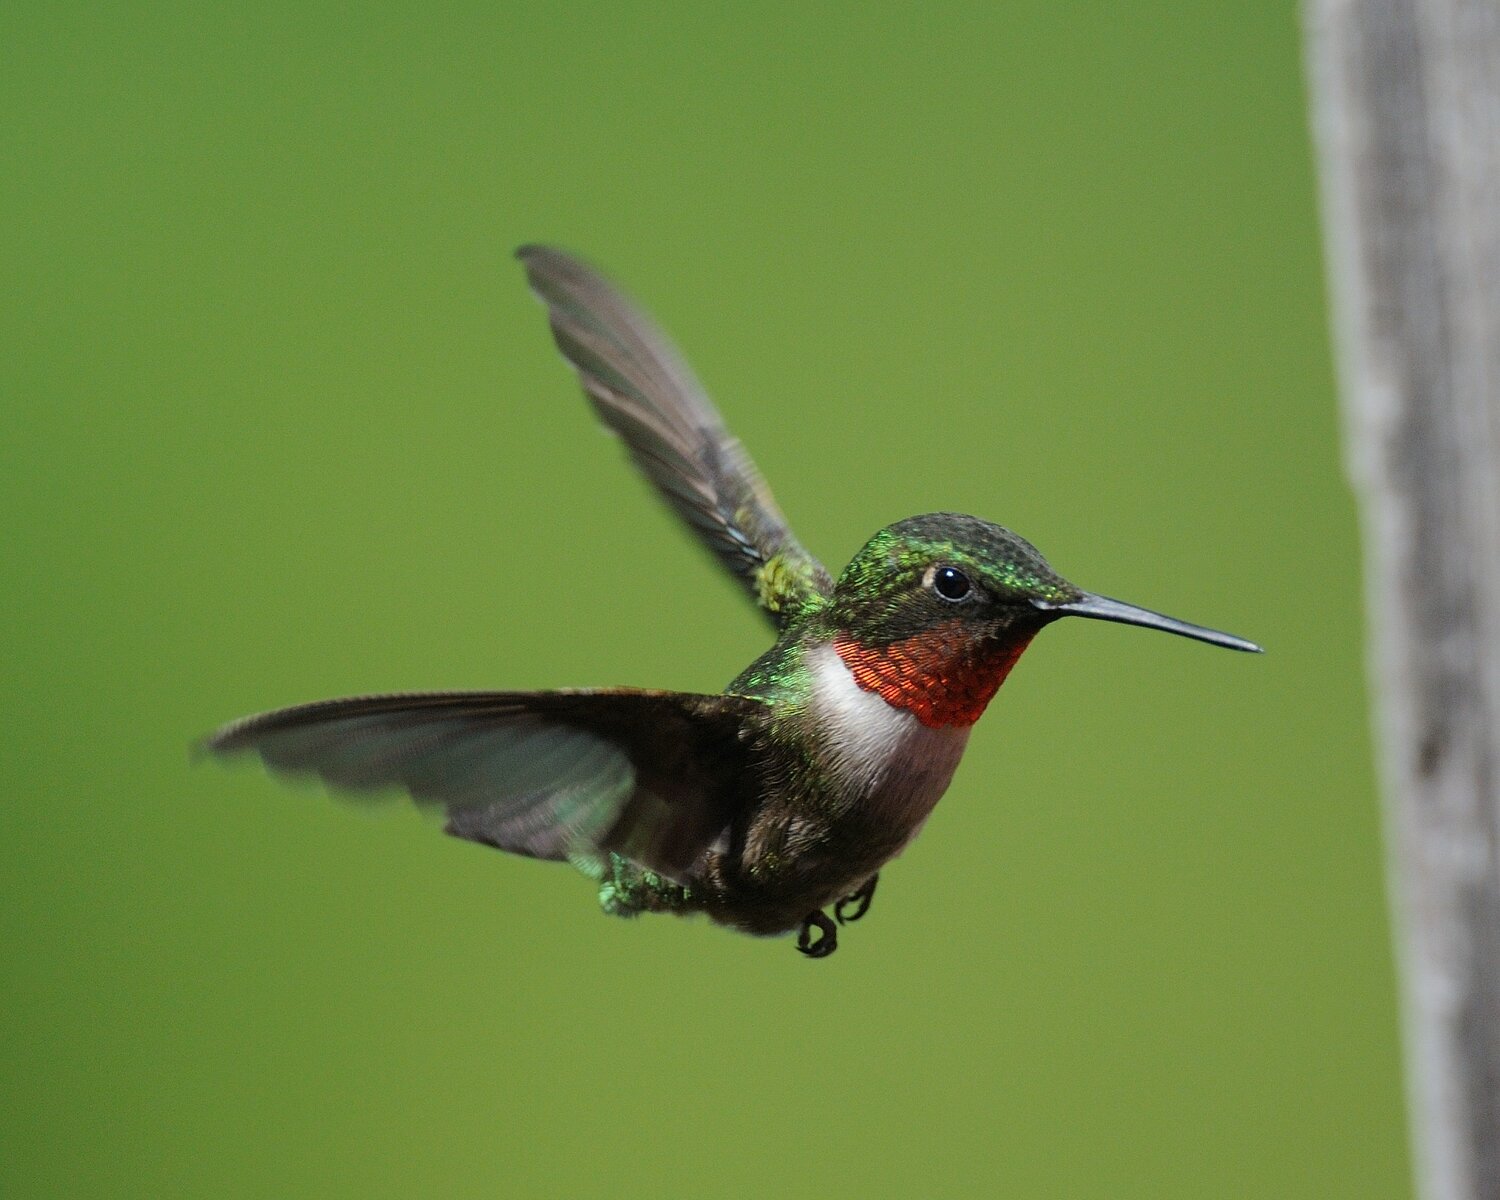 The male of this species has the namesake ruby patch on its throat. When sunlight hits the throat patch correctly, the iridescent properties of the feathers reflect a brilliant red color. Other sun angles or shadow conditions can make the patch appear dark. ..At a feeder, the male might bully and chase off females and immature hummingbirds. People frequently put up two or more feeders on opposite sides of the house to give more hummingbirds a chance at the feeder.